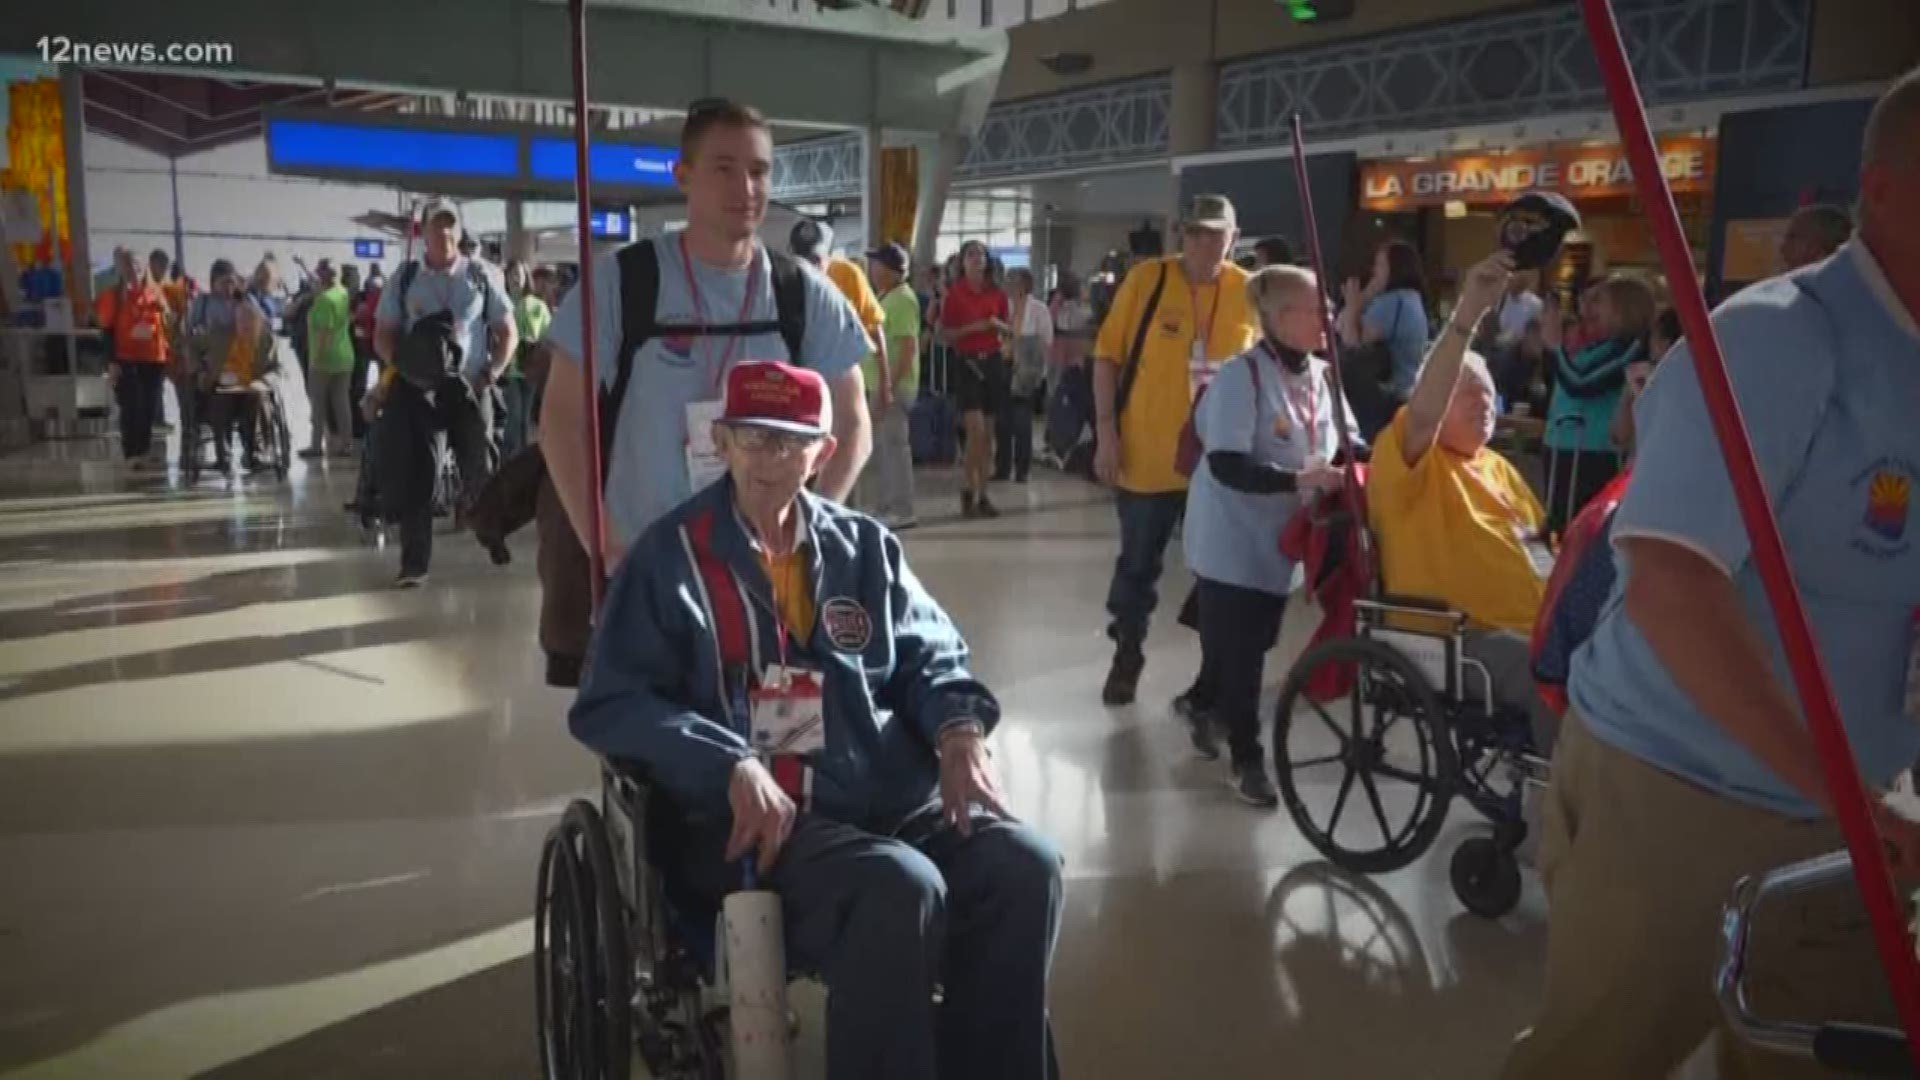 Embry-Riddle Aeronautical University students were humbled by participating in an honor flight for WWII and Korean War veterans from Prescott to Washington D.C.